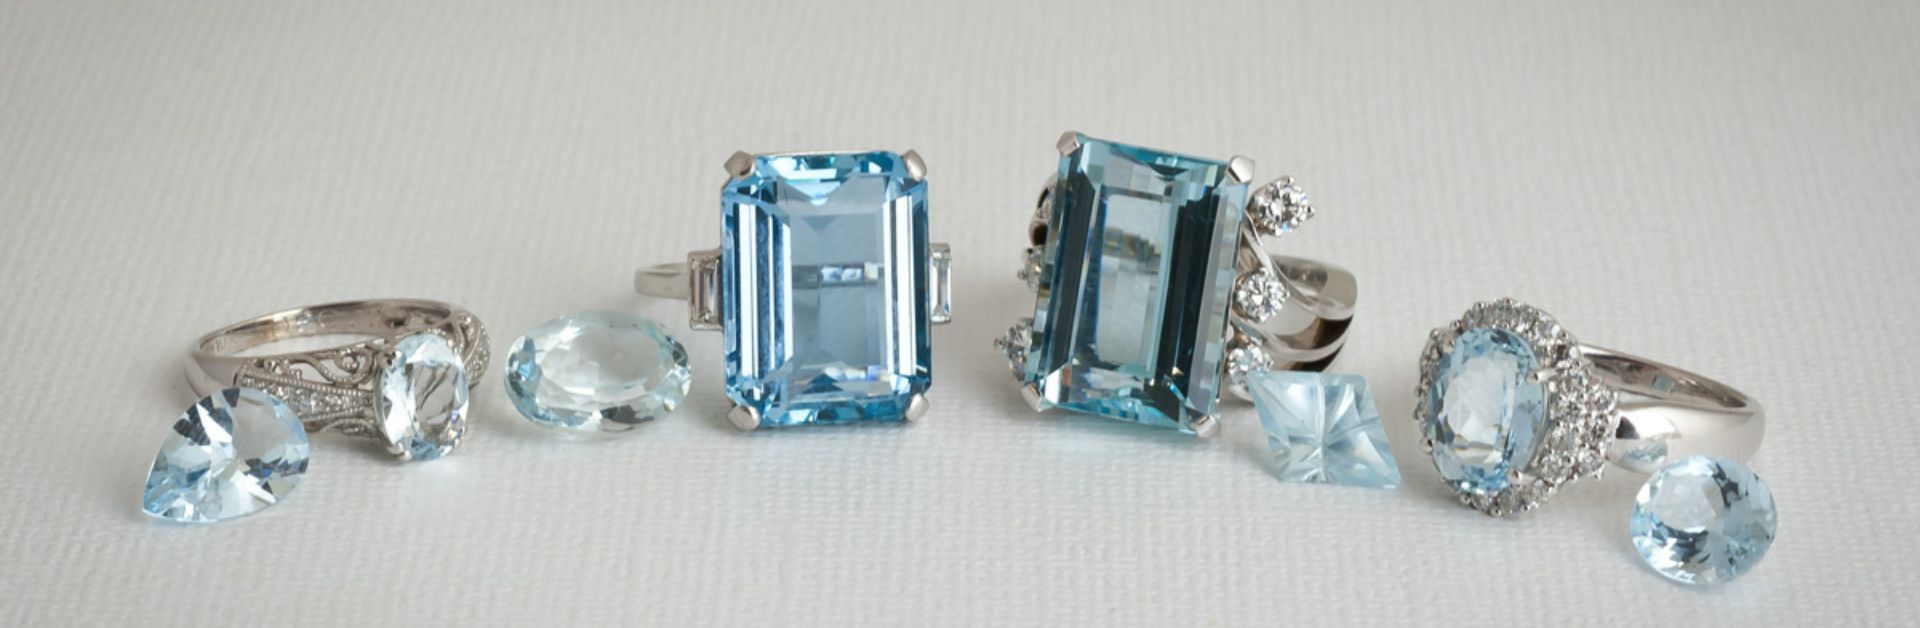 Everything you should know about Aquamarine Stones